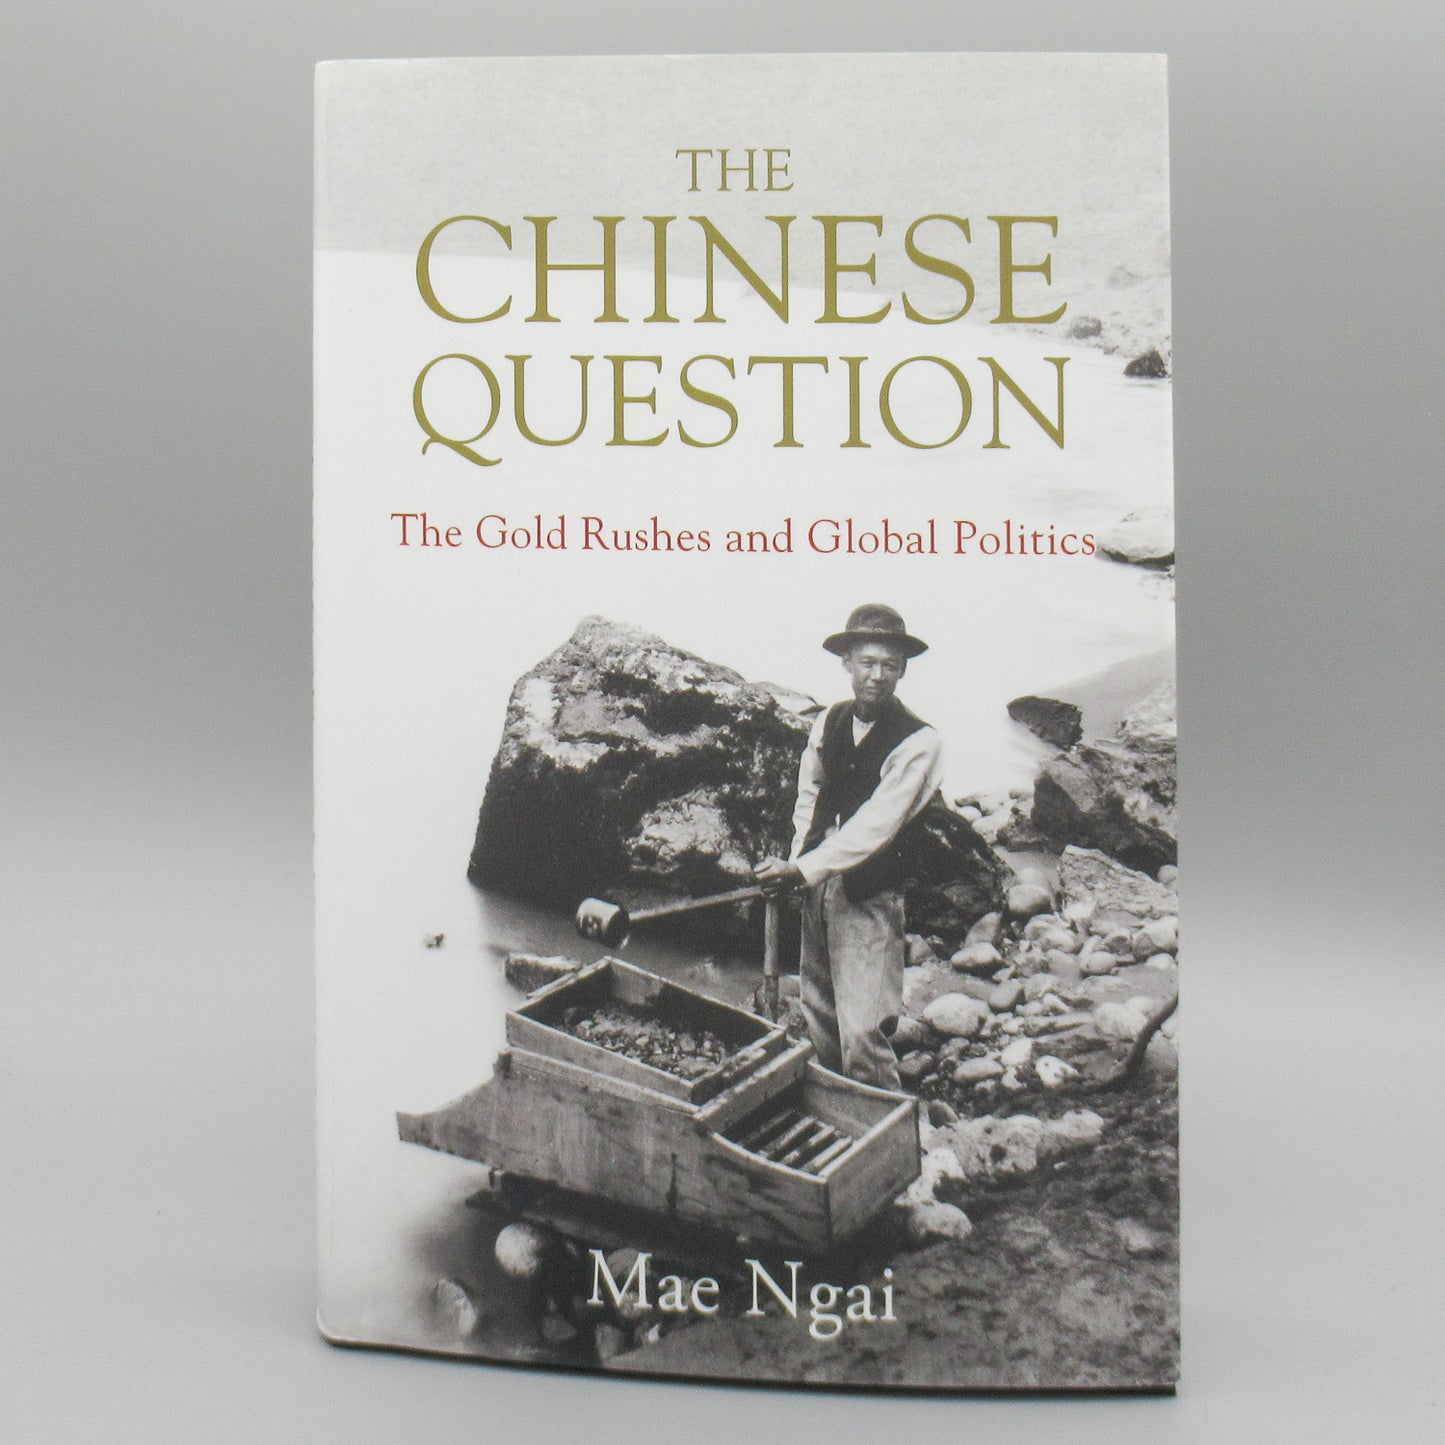 The Chinese Question: The Gold Rushes and Global Politics